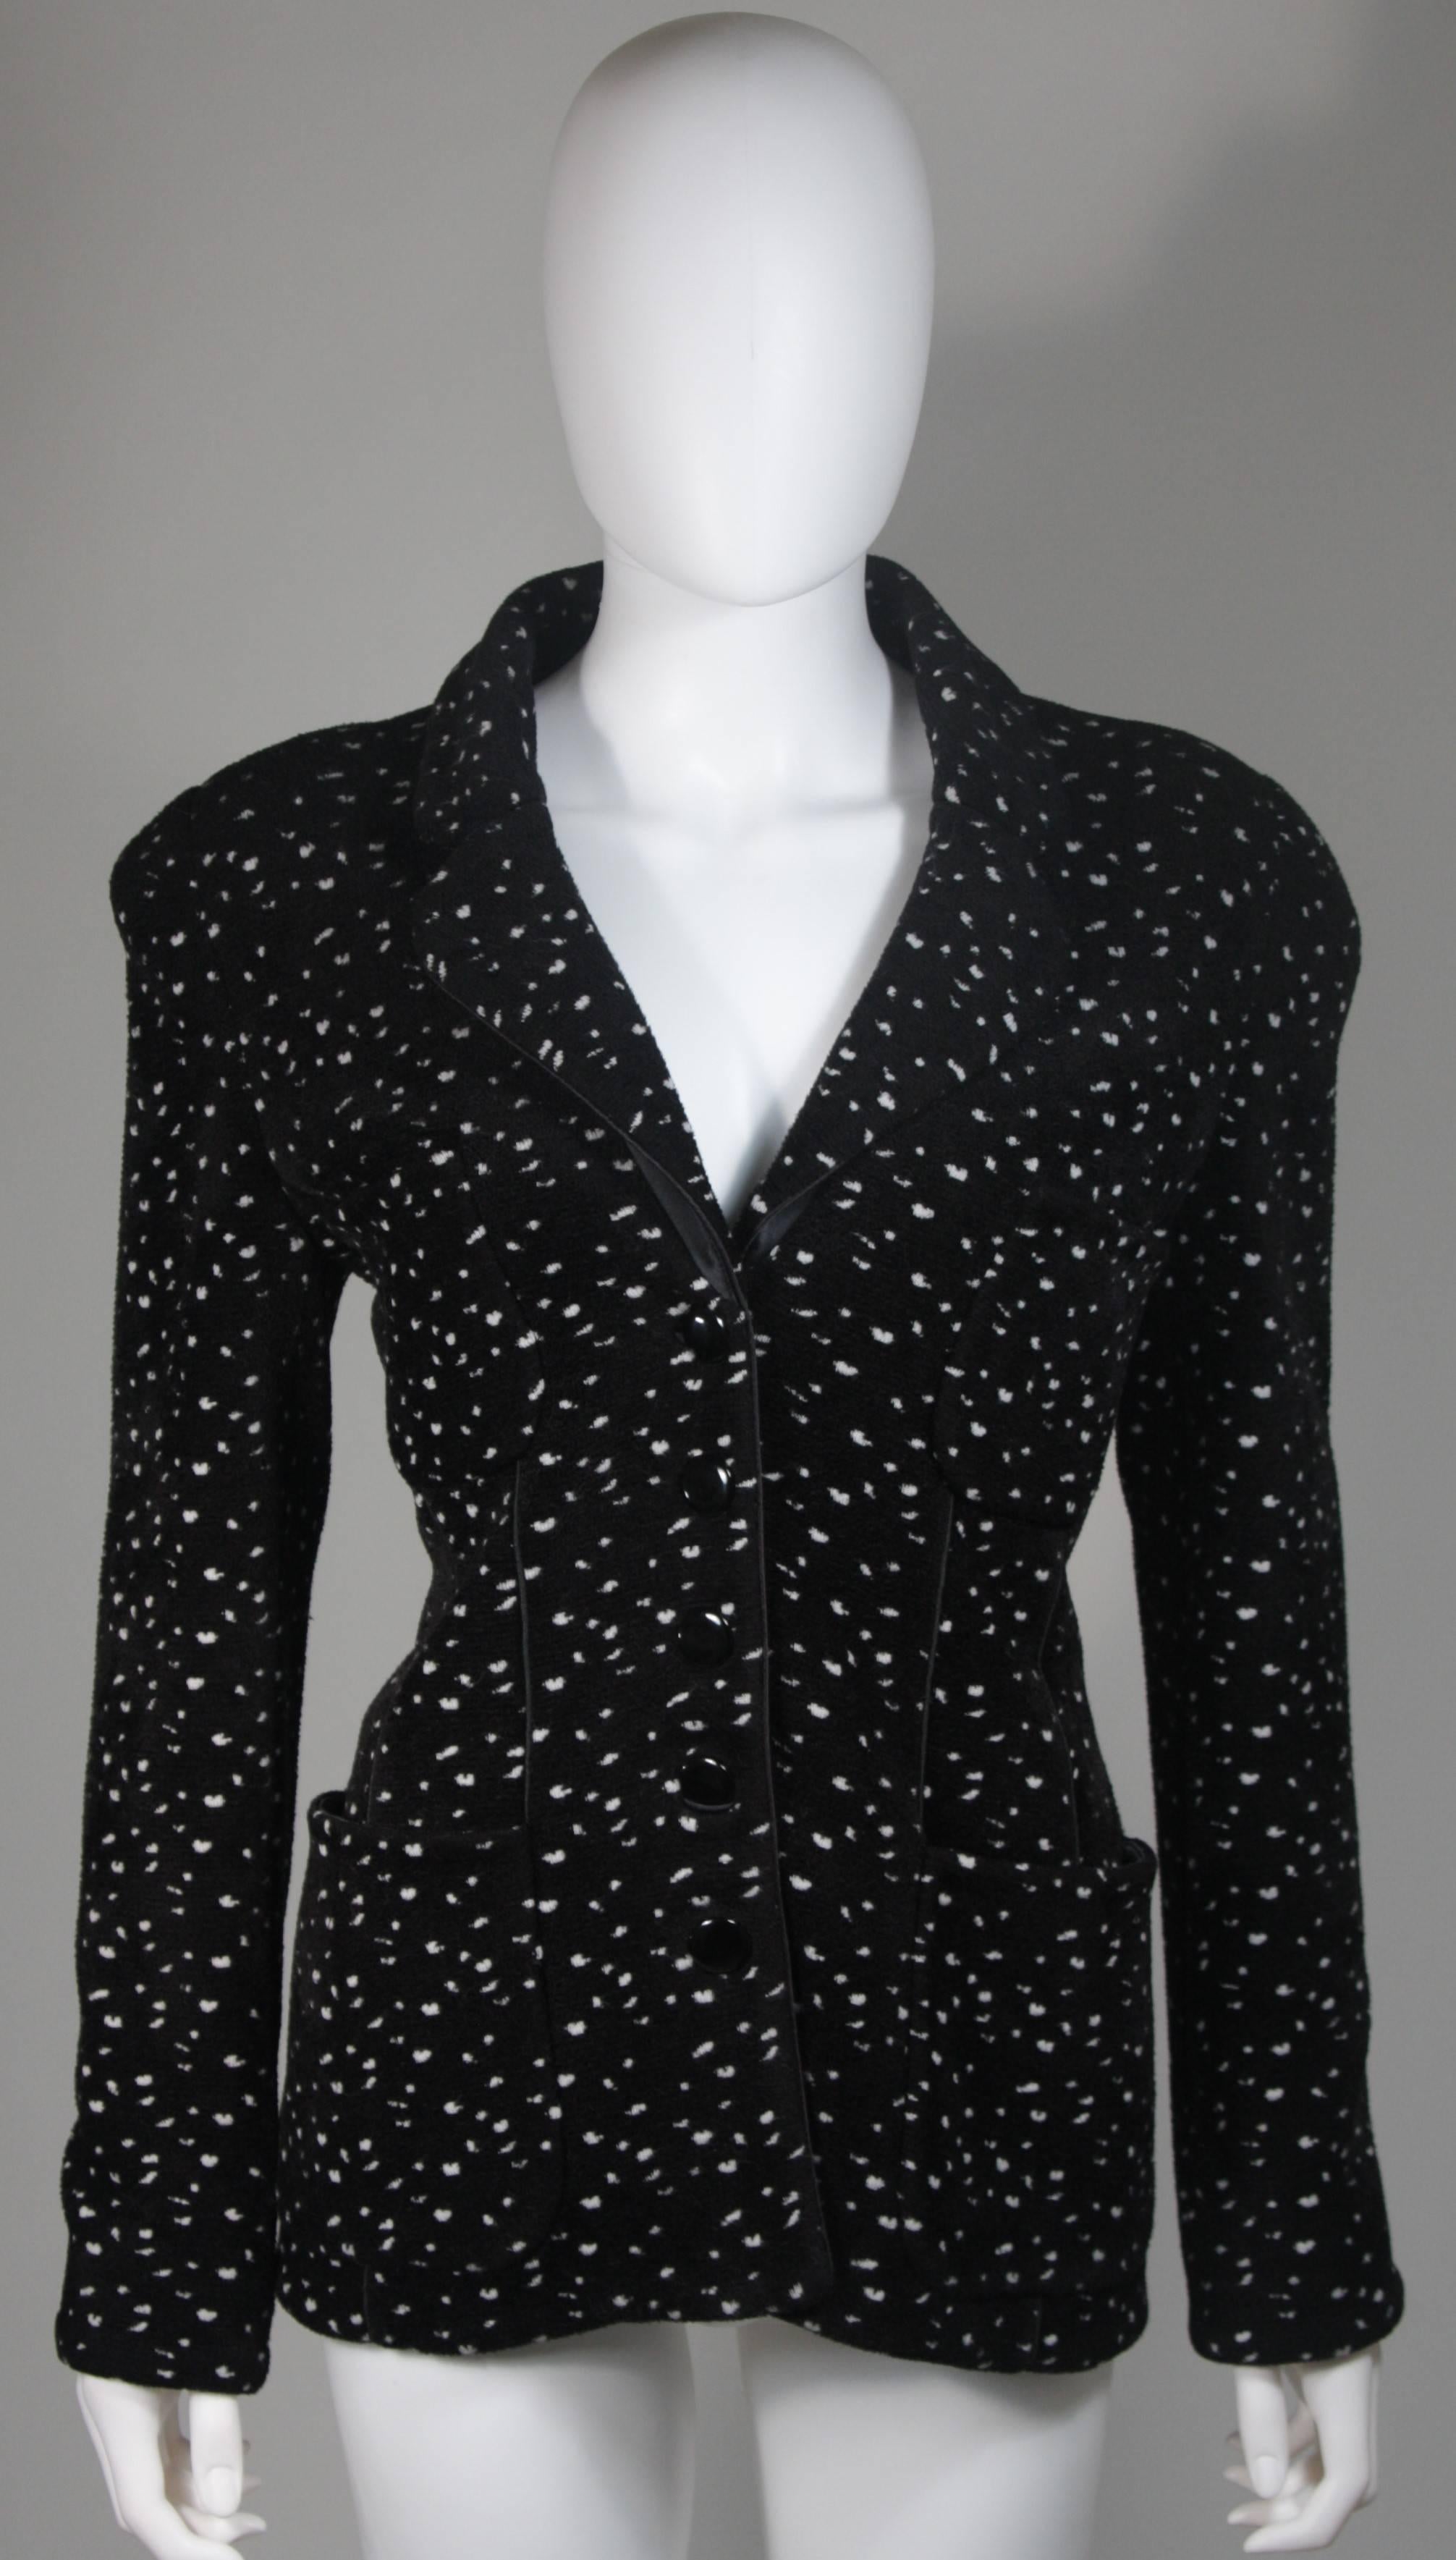 This Giorgio Armani jacket is composed of a wool blend in a black with white speckle textile print. There are front pockets, front button closures, and piping trim. In excellent condition. Made in Italy.

**Please cross-reference measurements for